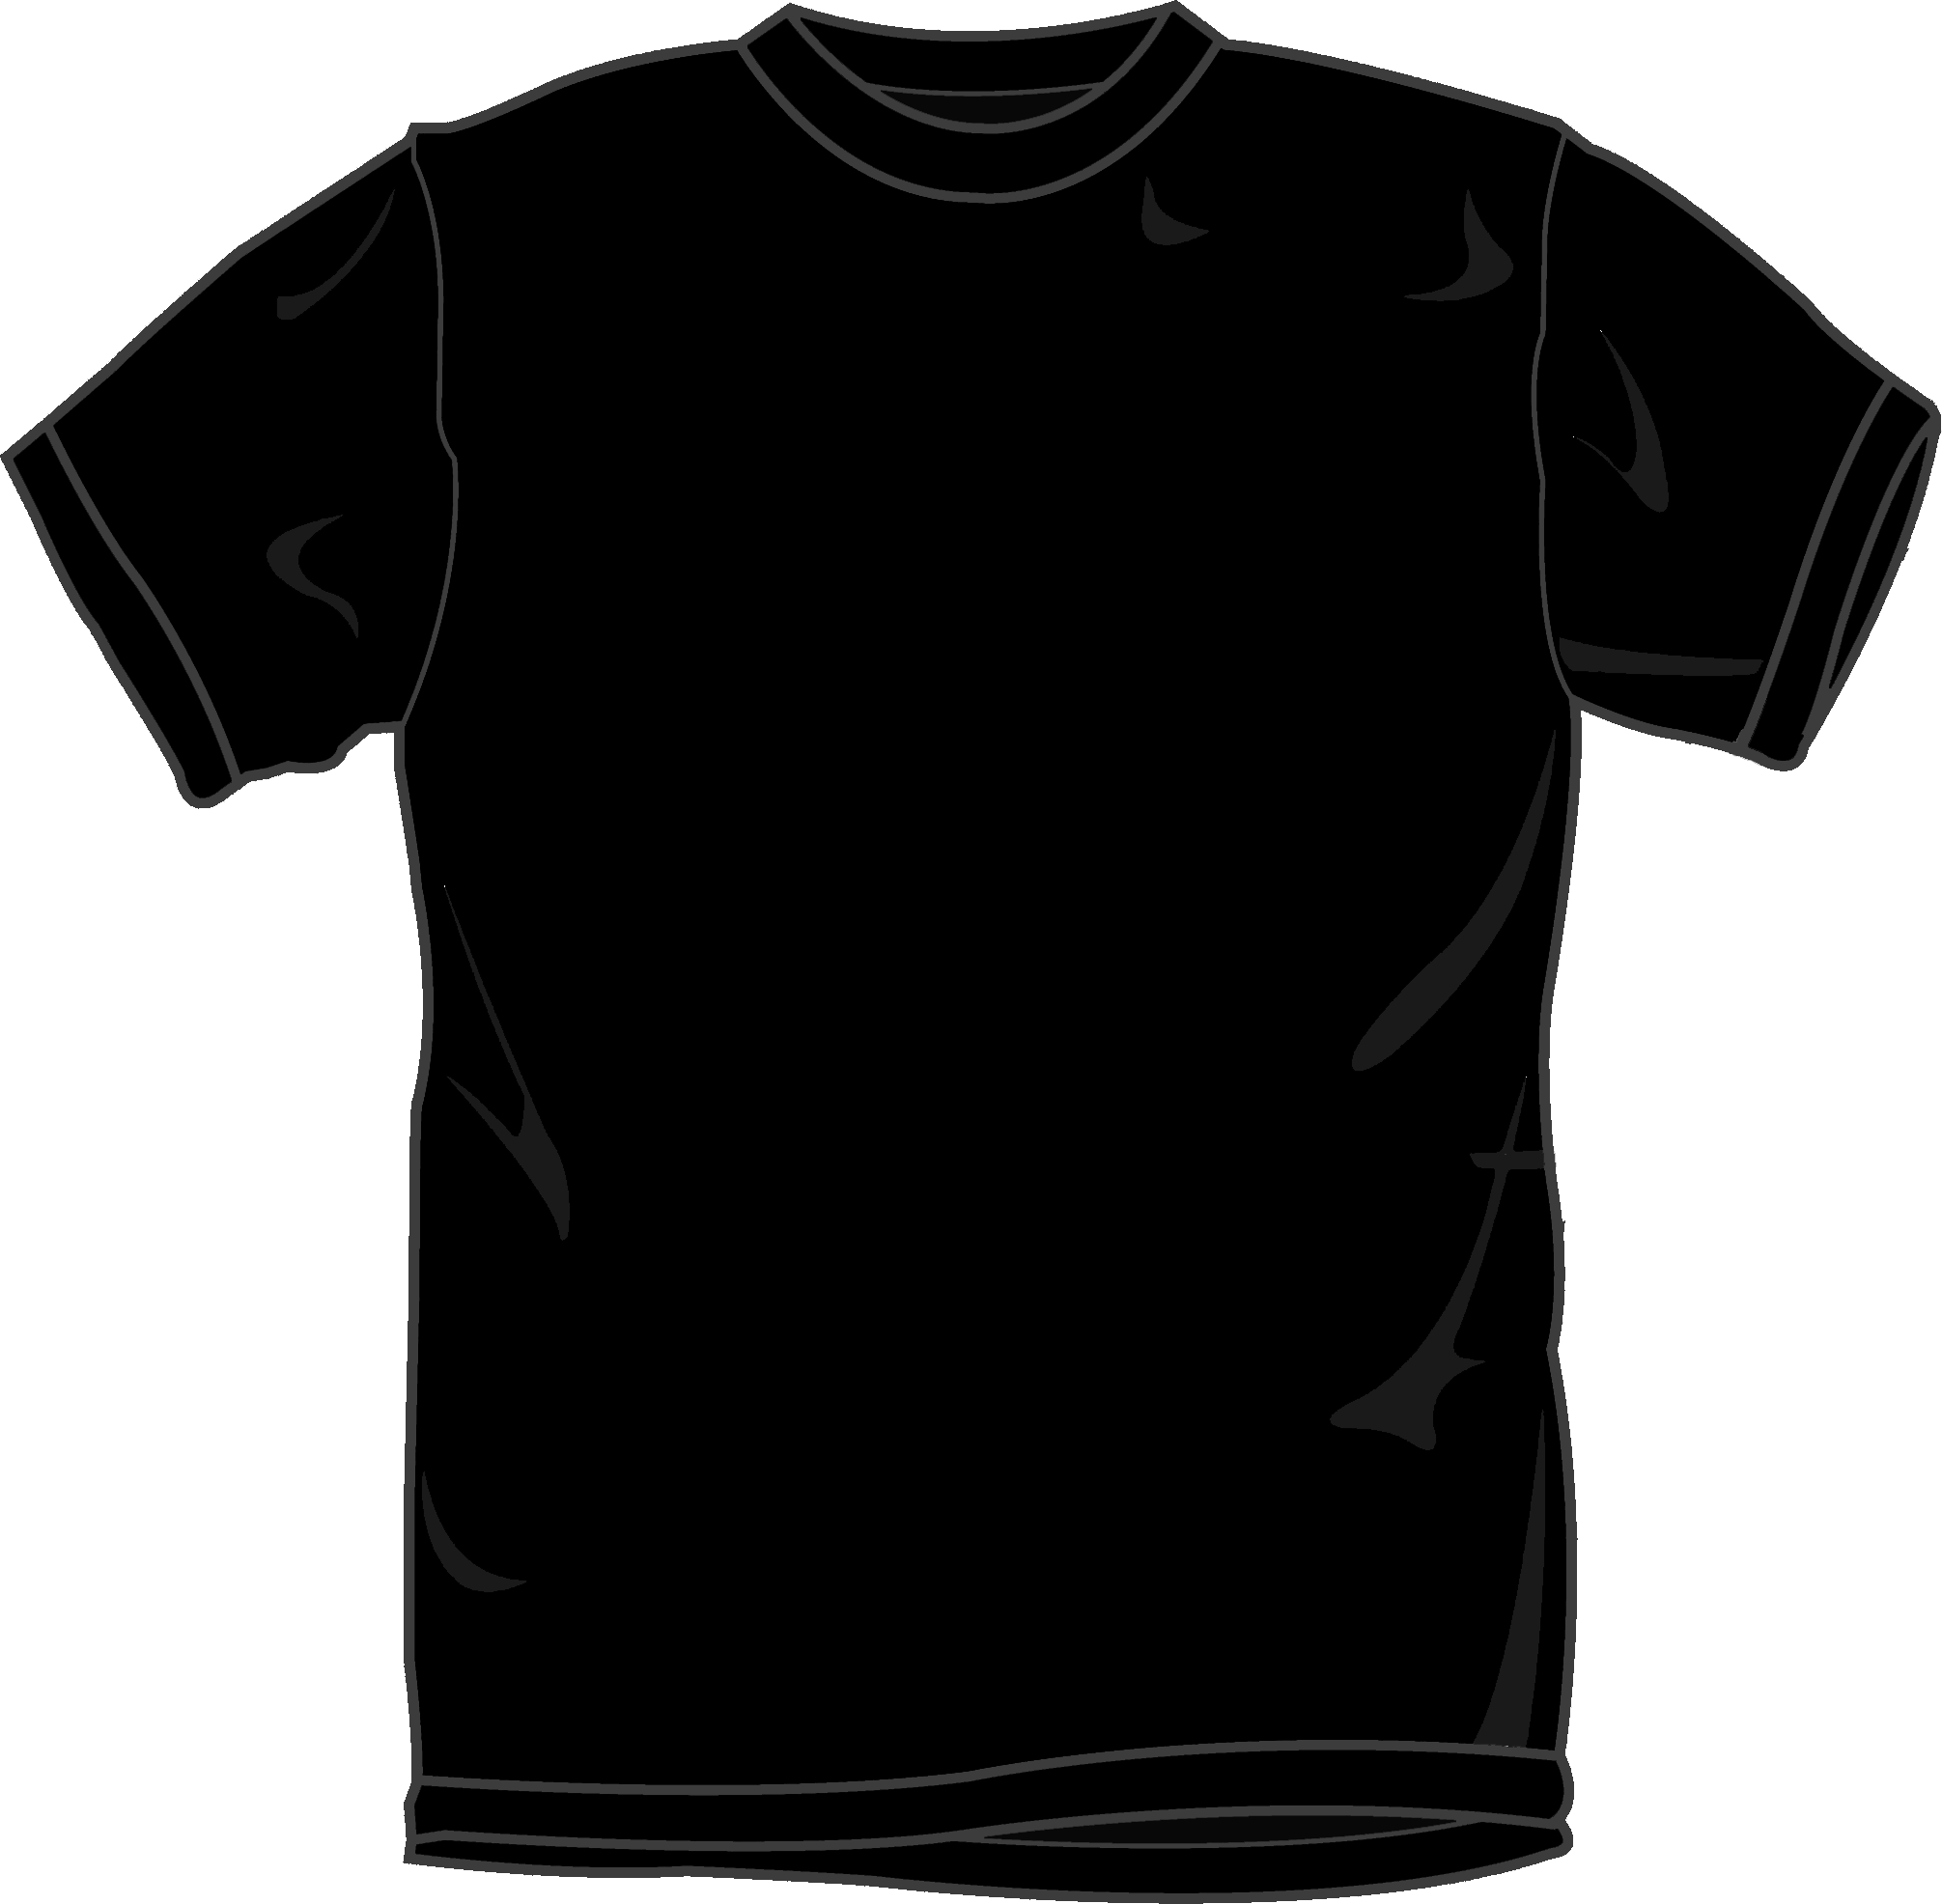 black-t-shirt-template-front-clipart-free-to-use-clip-art-resource-clipart-best-clipart-best